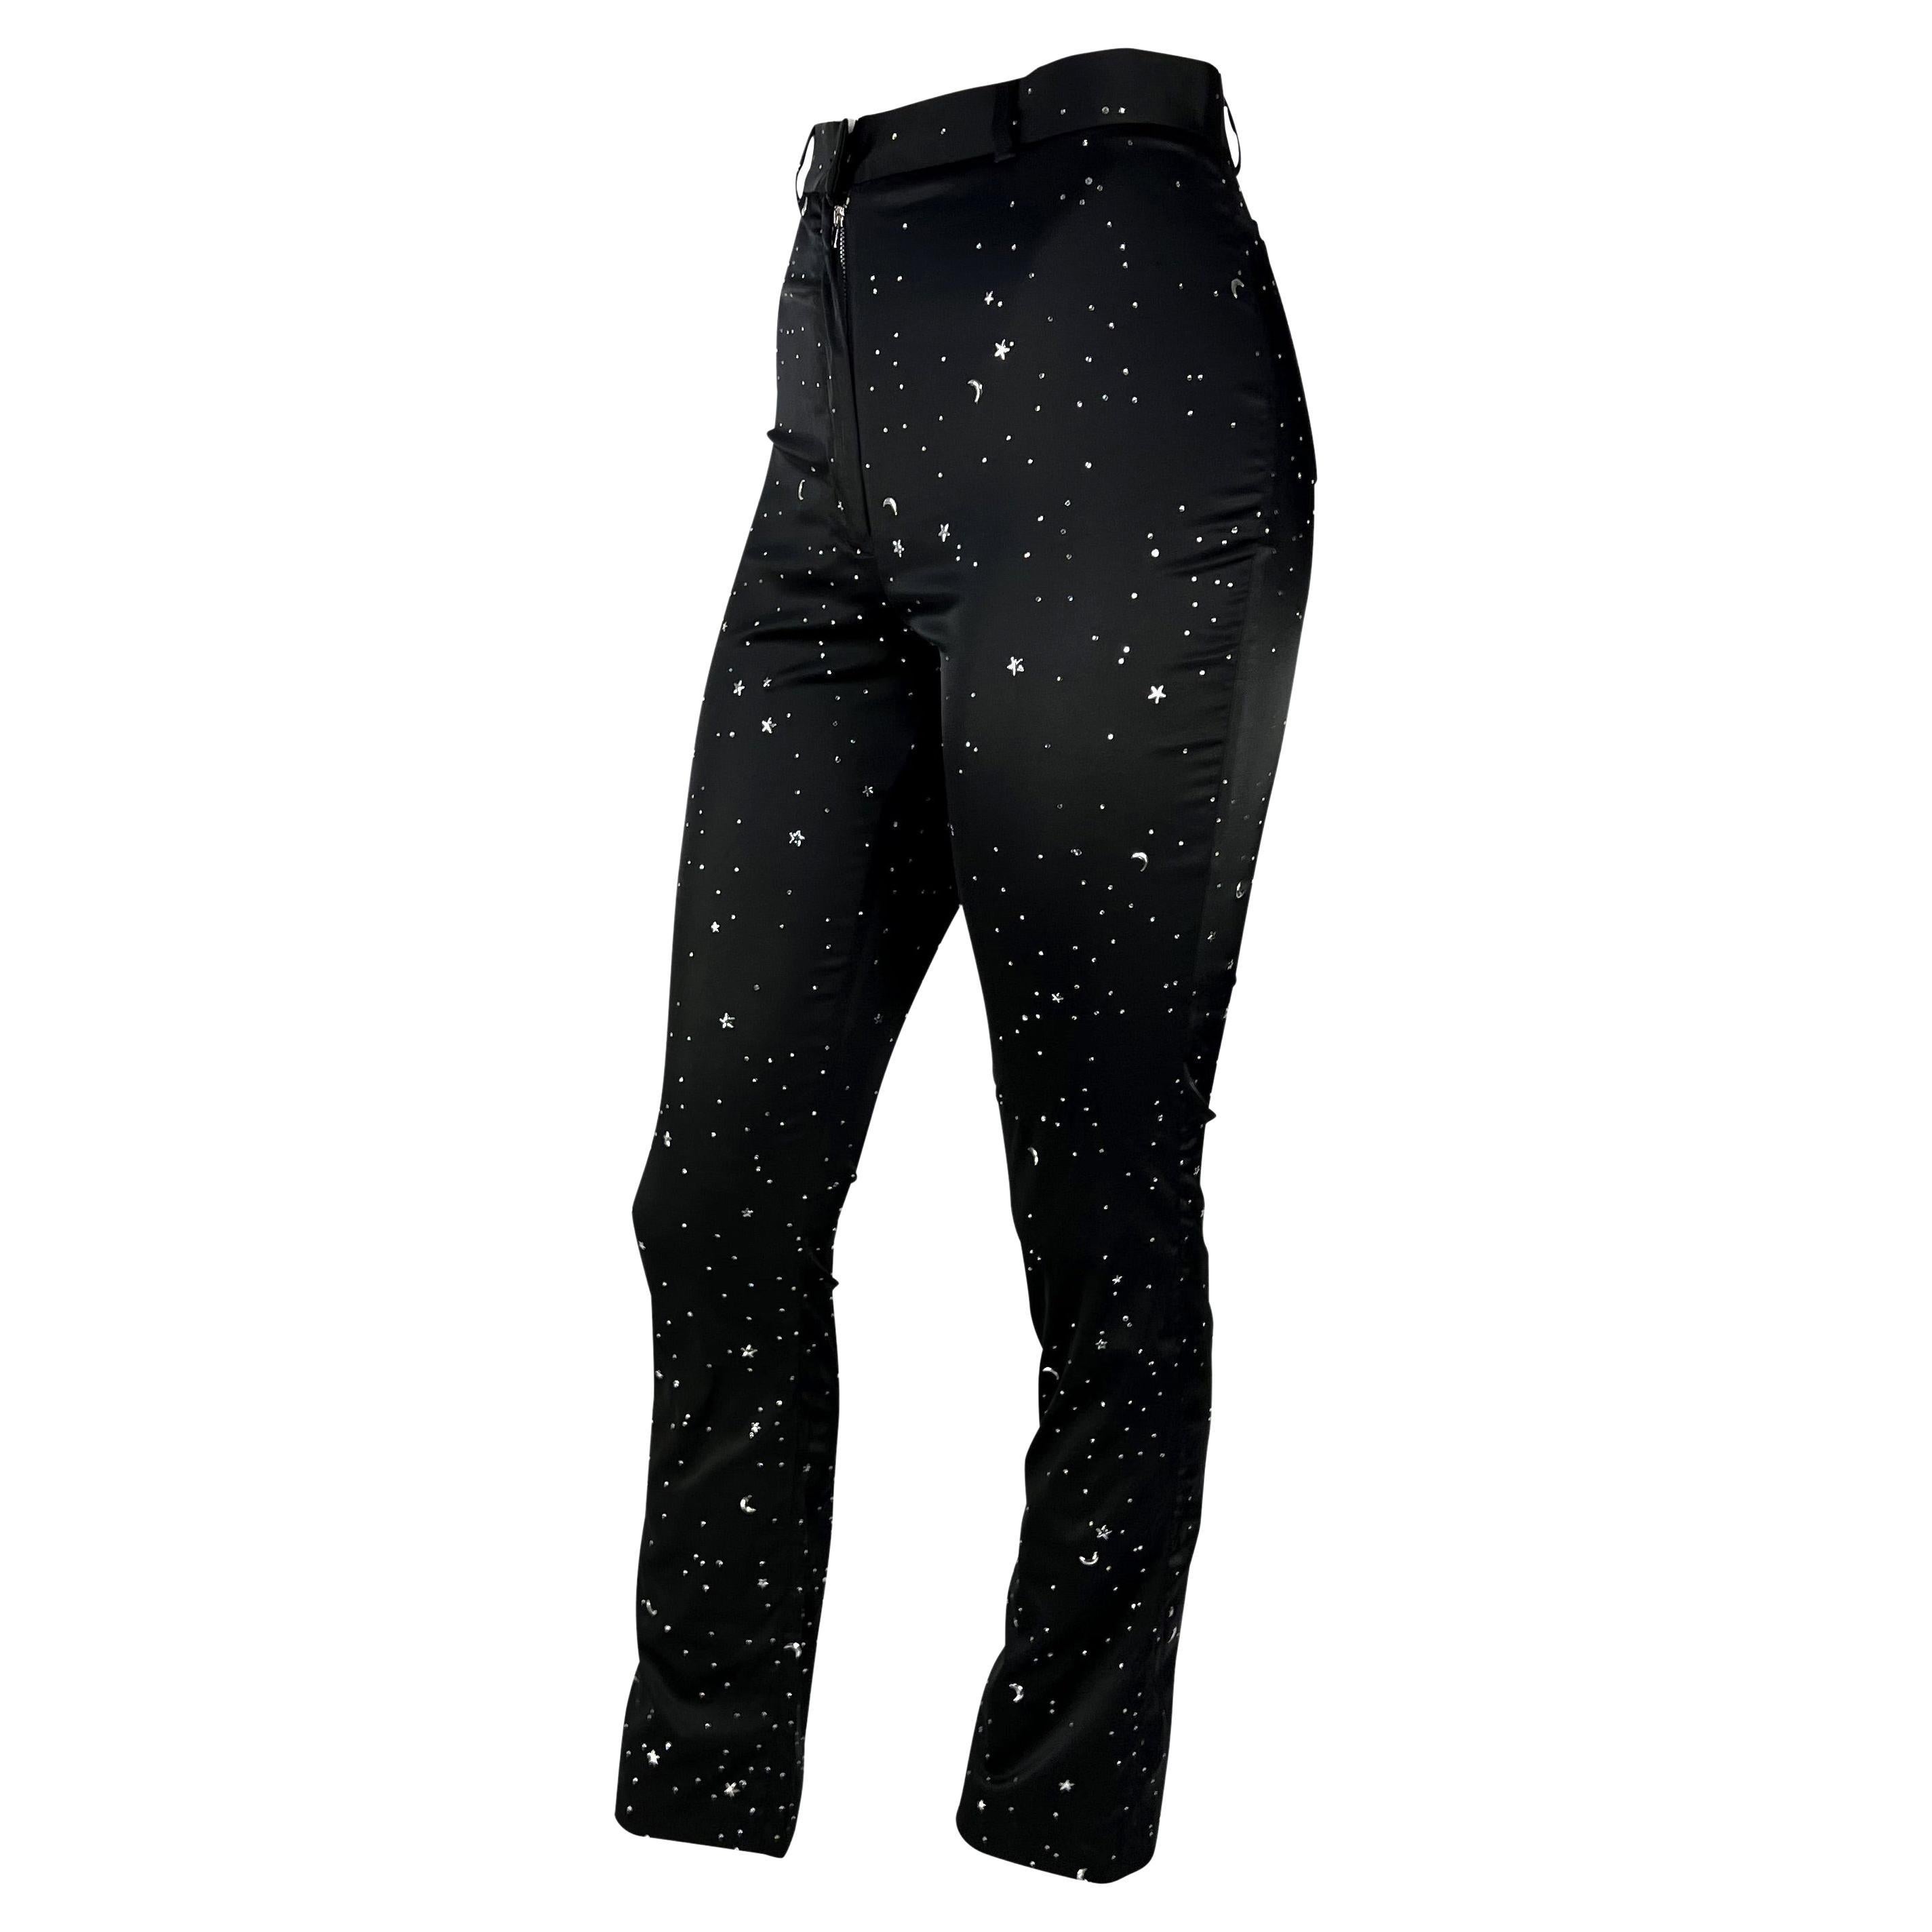 Presenting a pair of black satin stretch Dolce and Gabbana embellished constellation pants. From the 1990s, this fabulous pair of pants are constructed of soft shiny satin and are made complete with rhinestone and moon and star-shaped metal